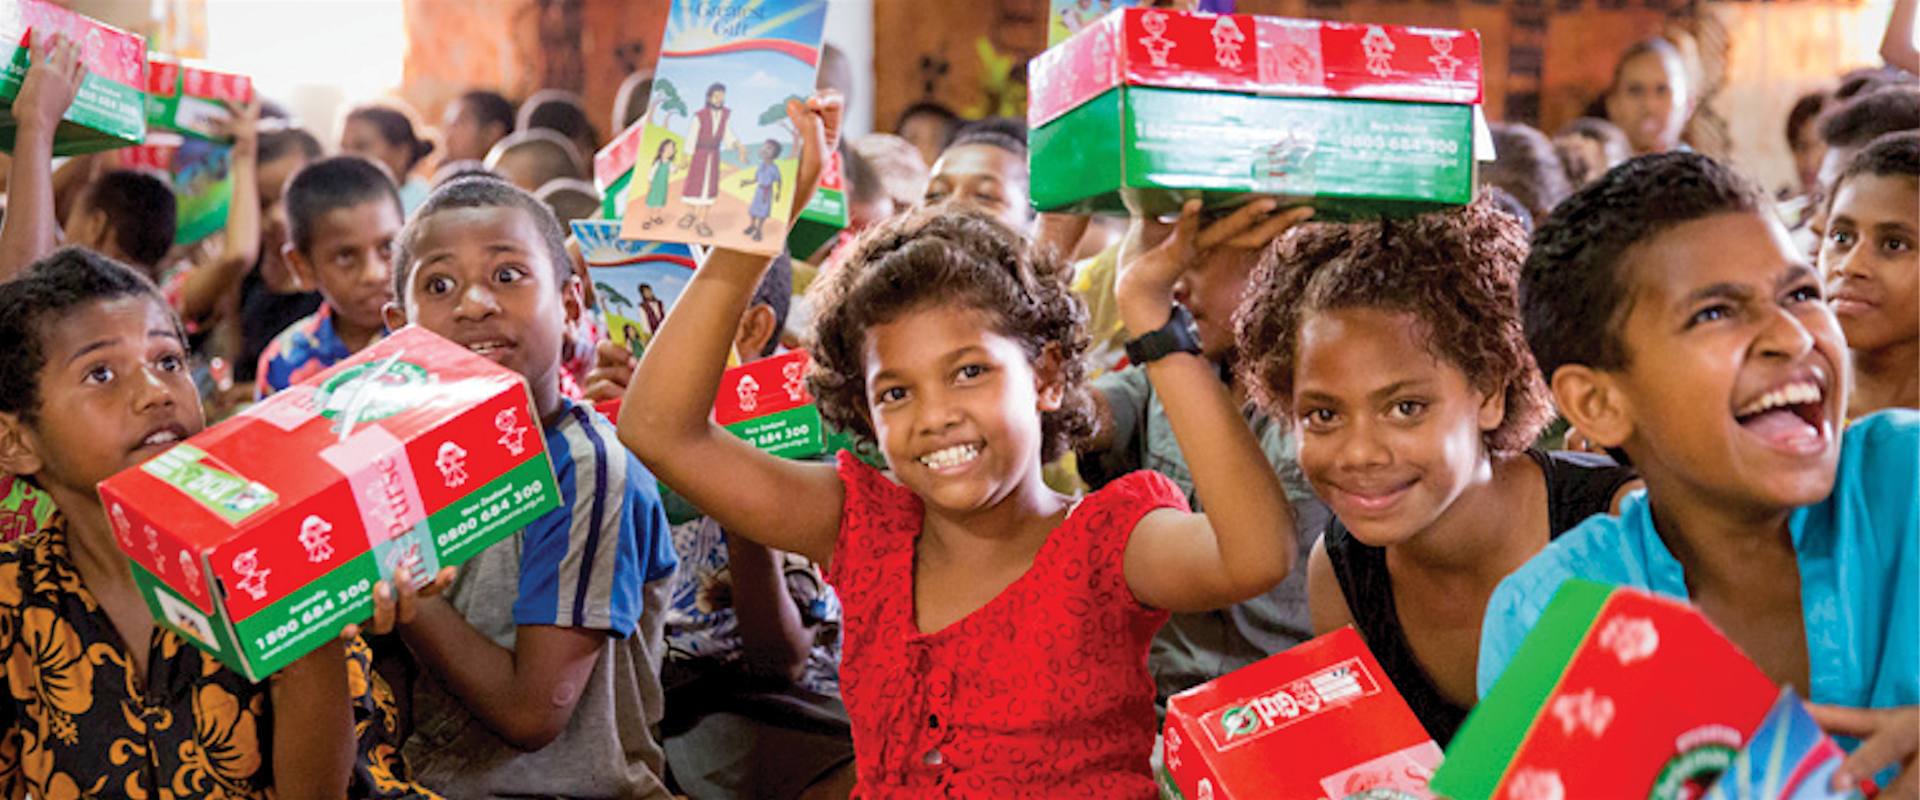 Operation Christmas Child Packing Party
November 2 | Oak Brook
